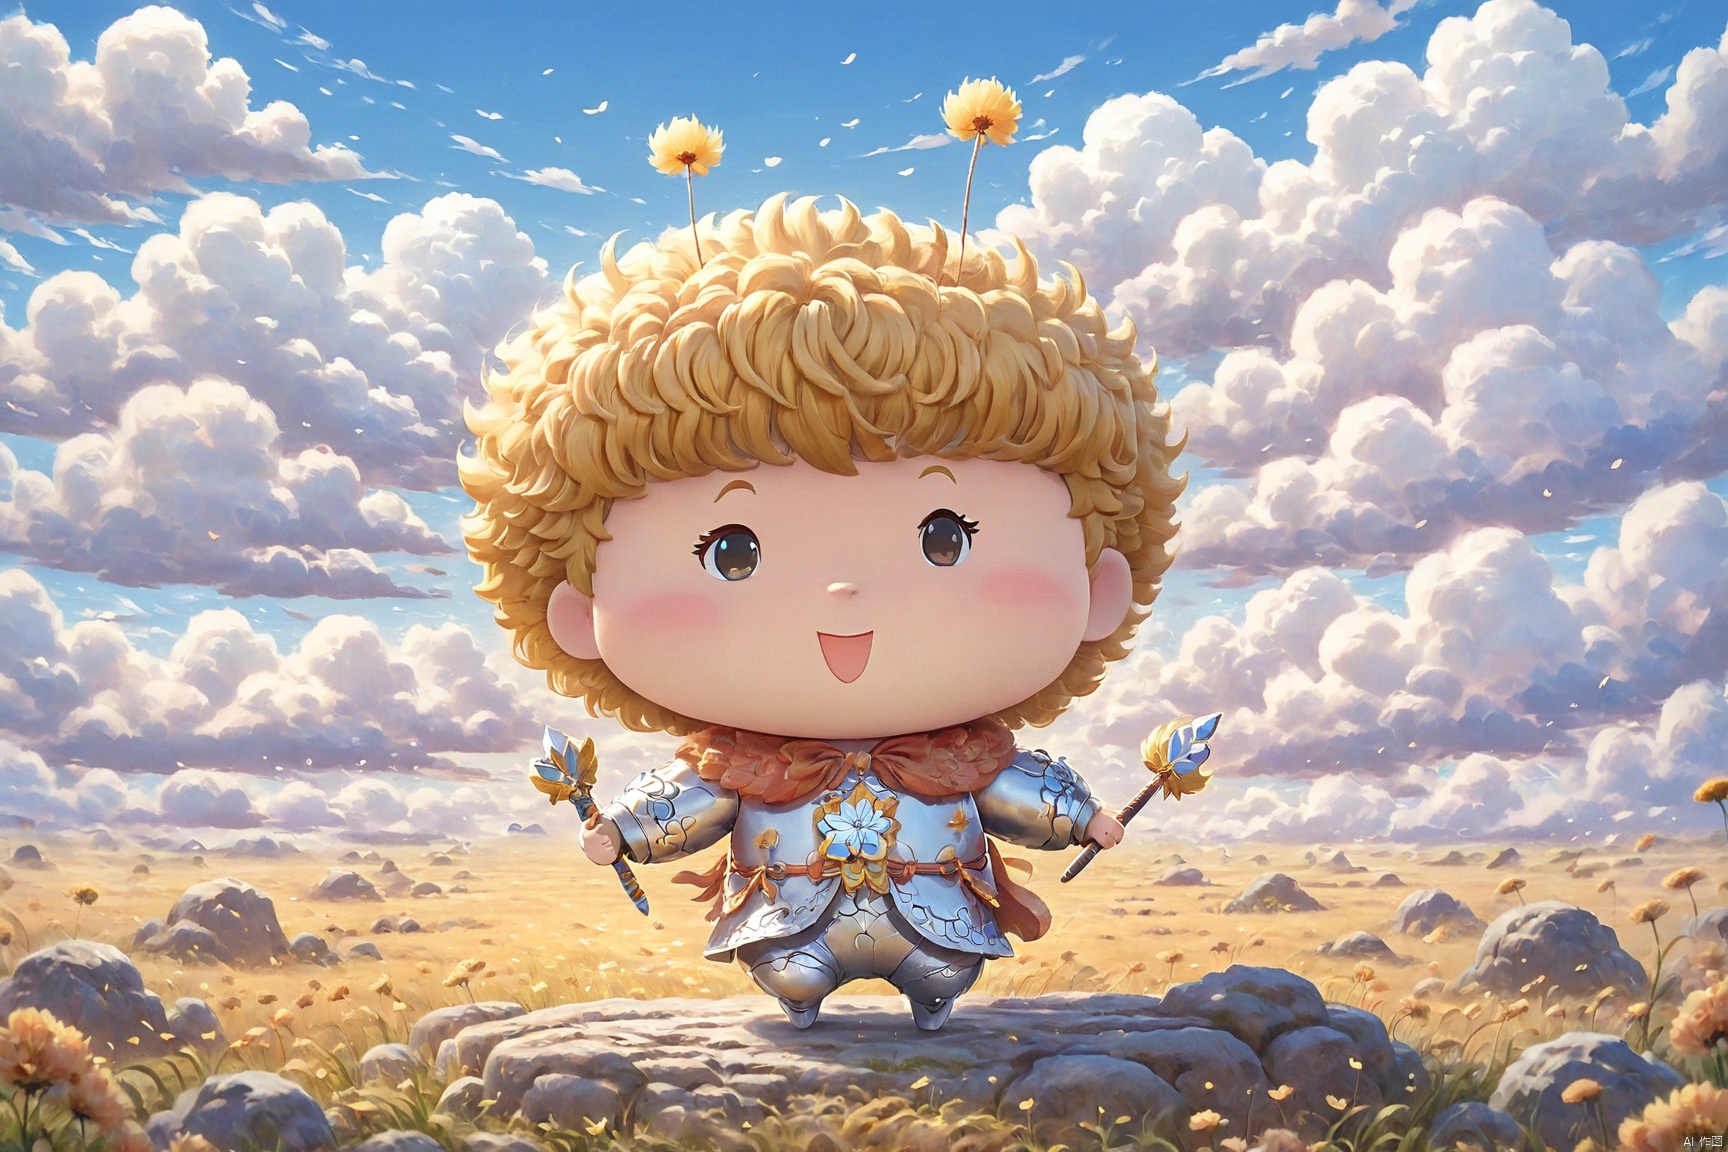  Panorama view: a cute baby, dressed in armor and holding a sword, rides on a woolly mammoth on the African savannah. Lions, tigers, and cheetahs bow down before him. The oil painting style and the art style of Hayao Miyazaki give the image a unique touch,side view